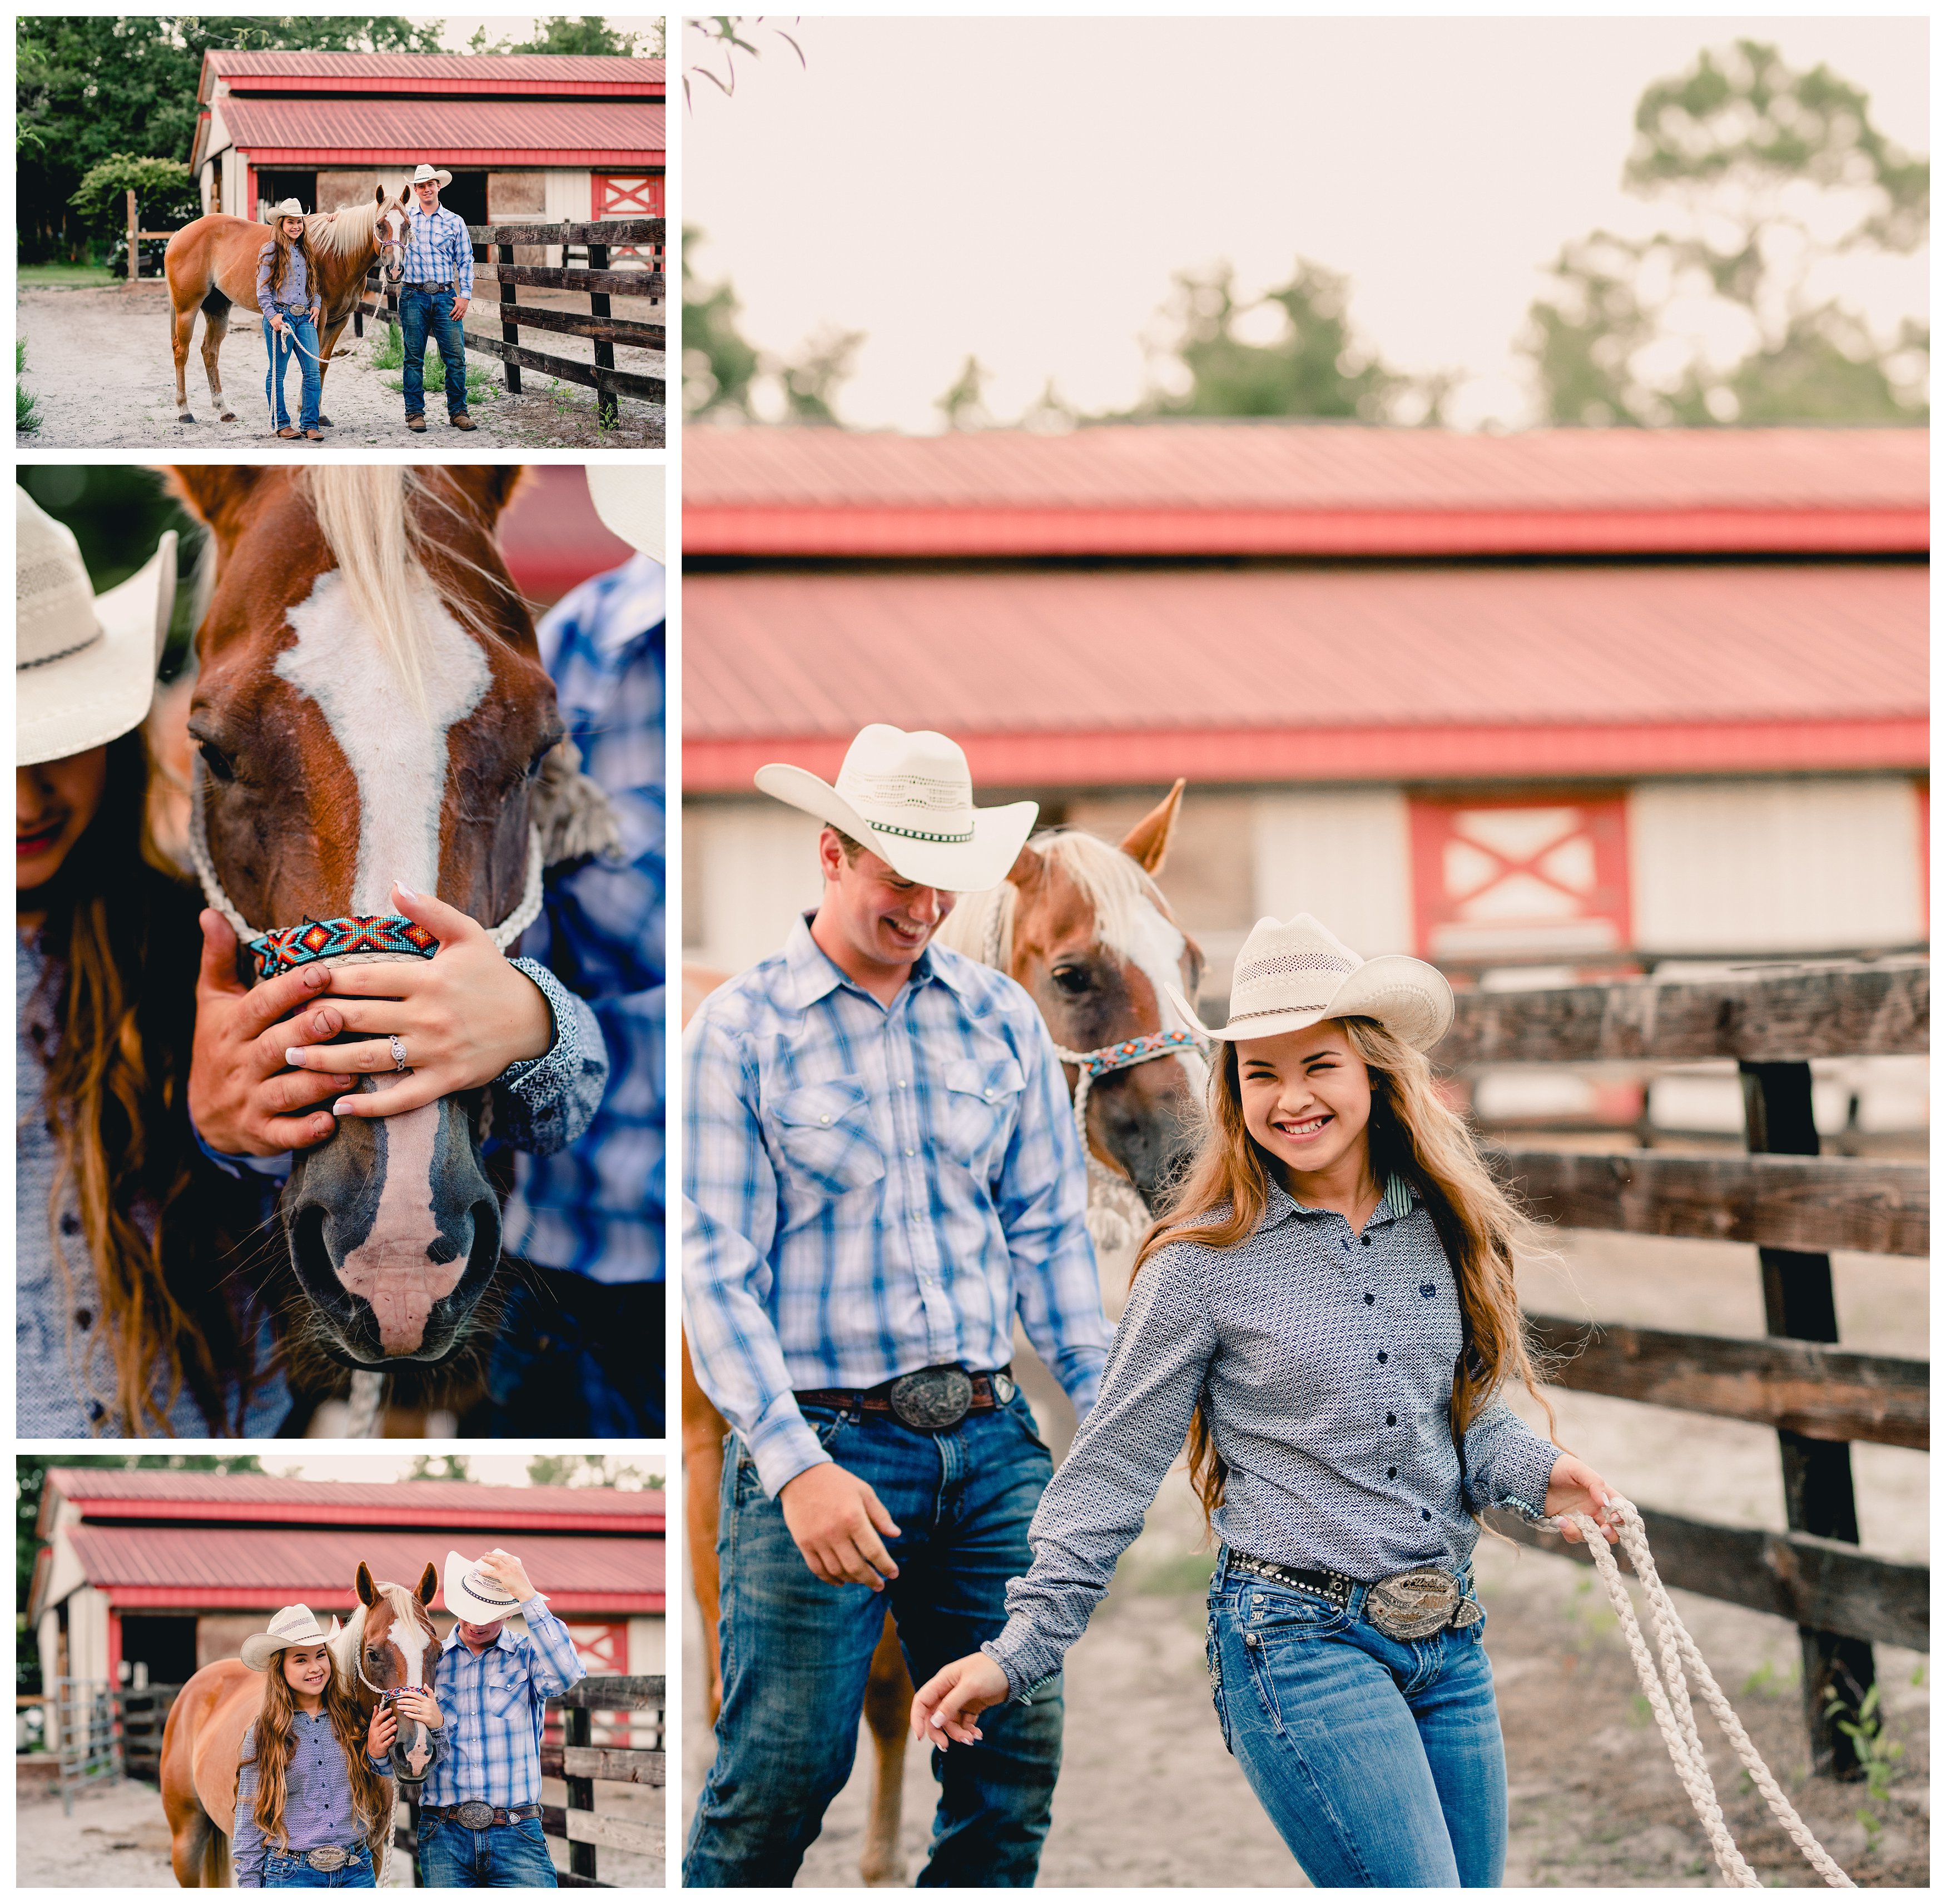 Fun poses for western photoshoot with cowgirl and cowboy in front of the horse barn.